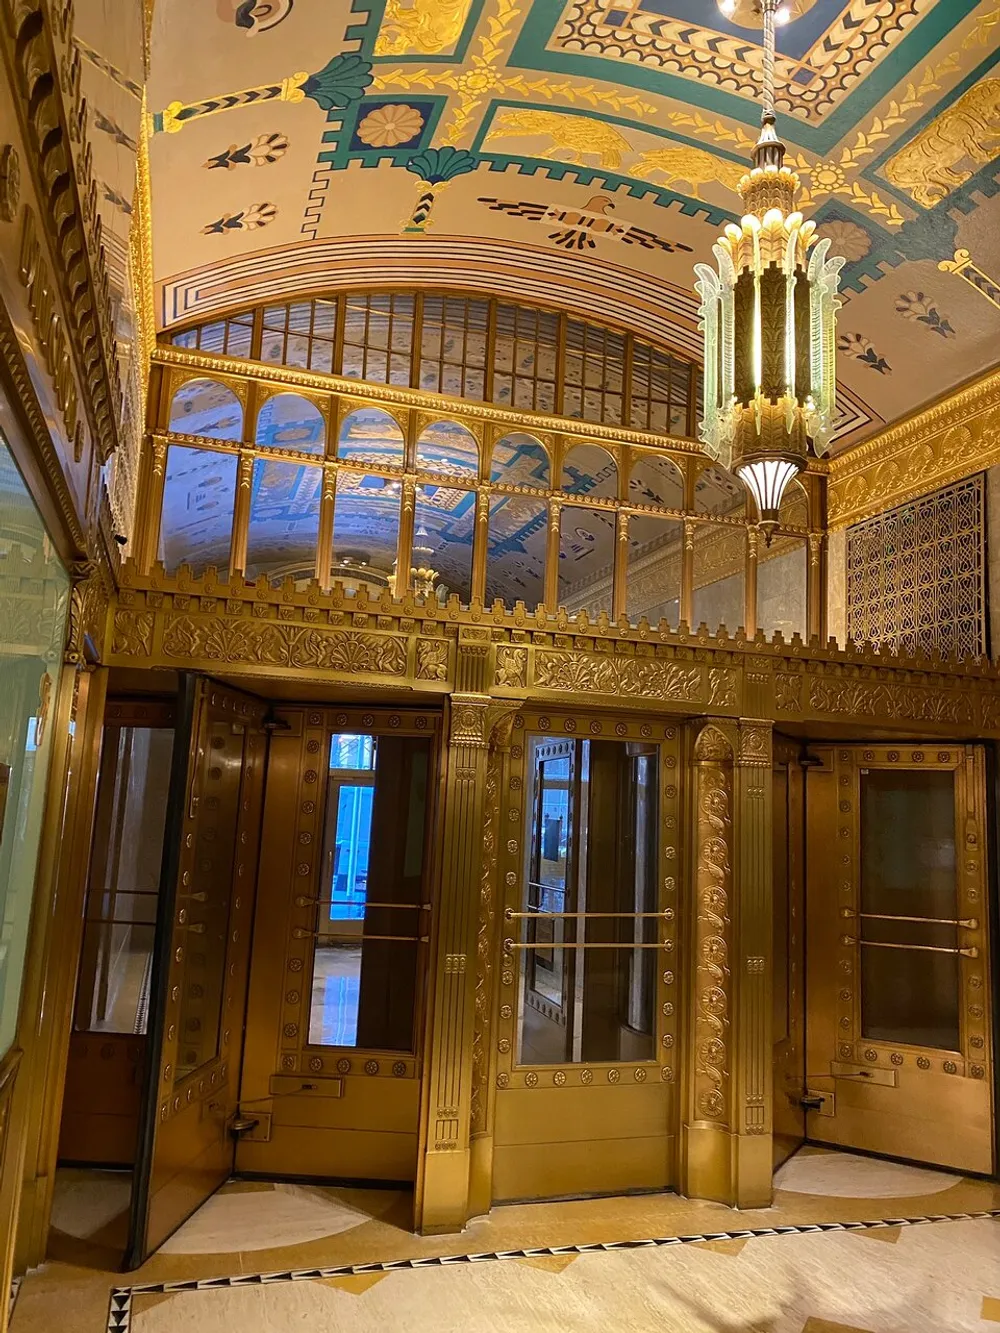 The image shows an ornate Art Deco interior with golden elevator doors decorative panels and a detailed ceiling with a hanging chandelier reflecting a luxurious architectural style